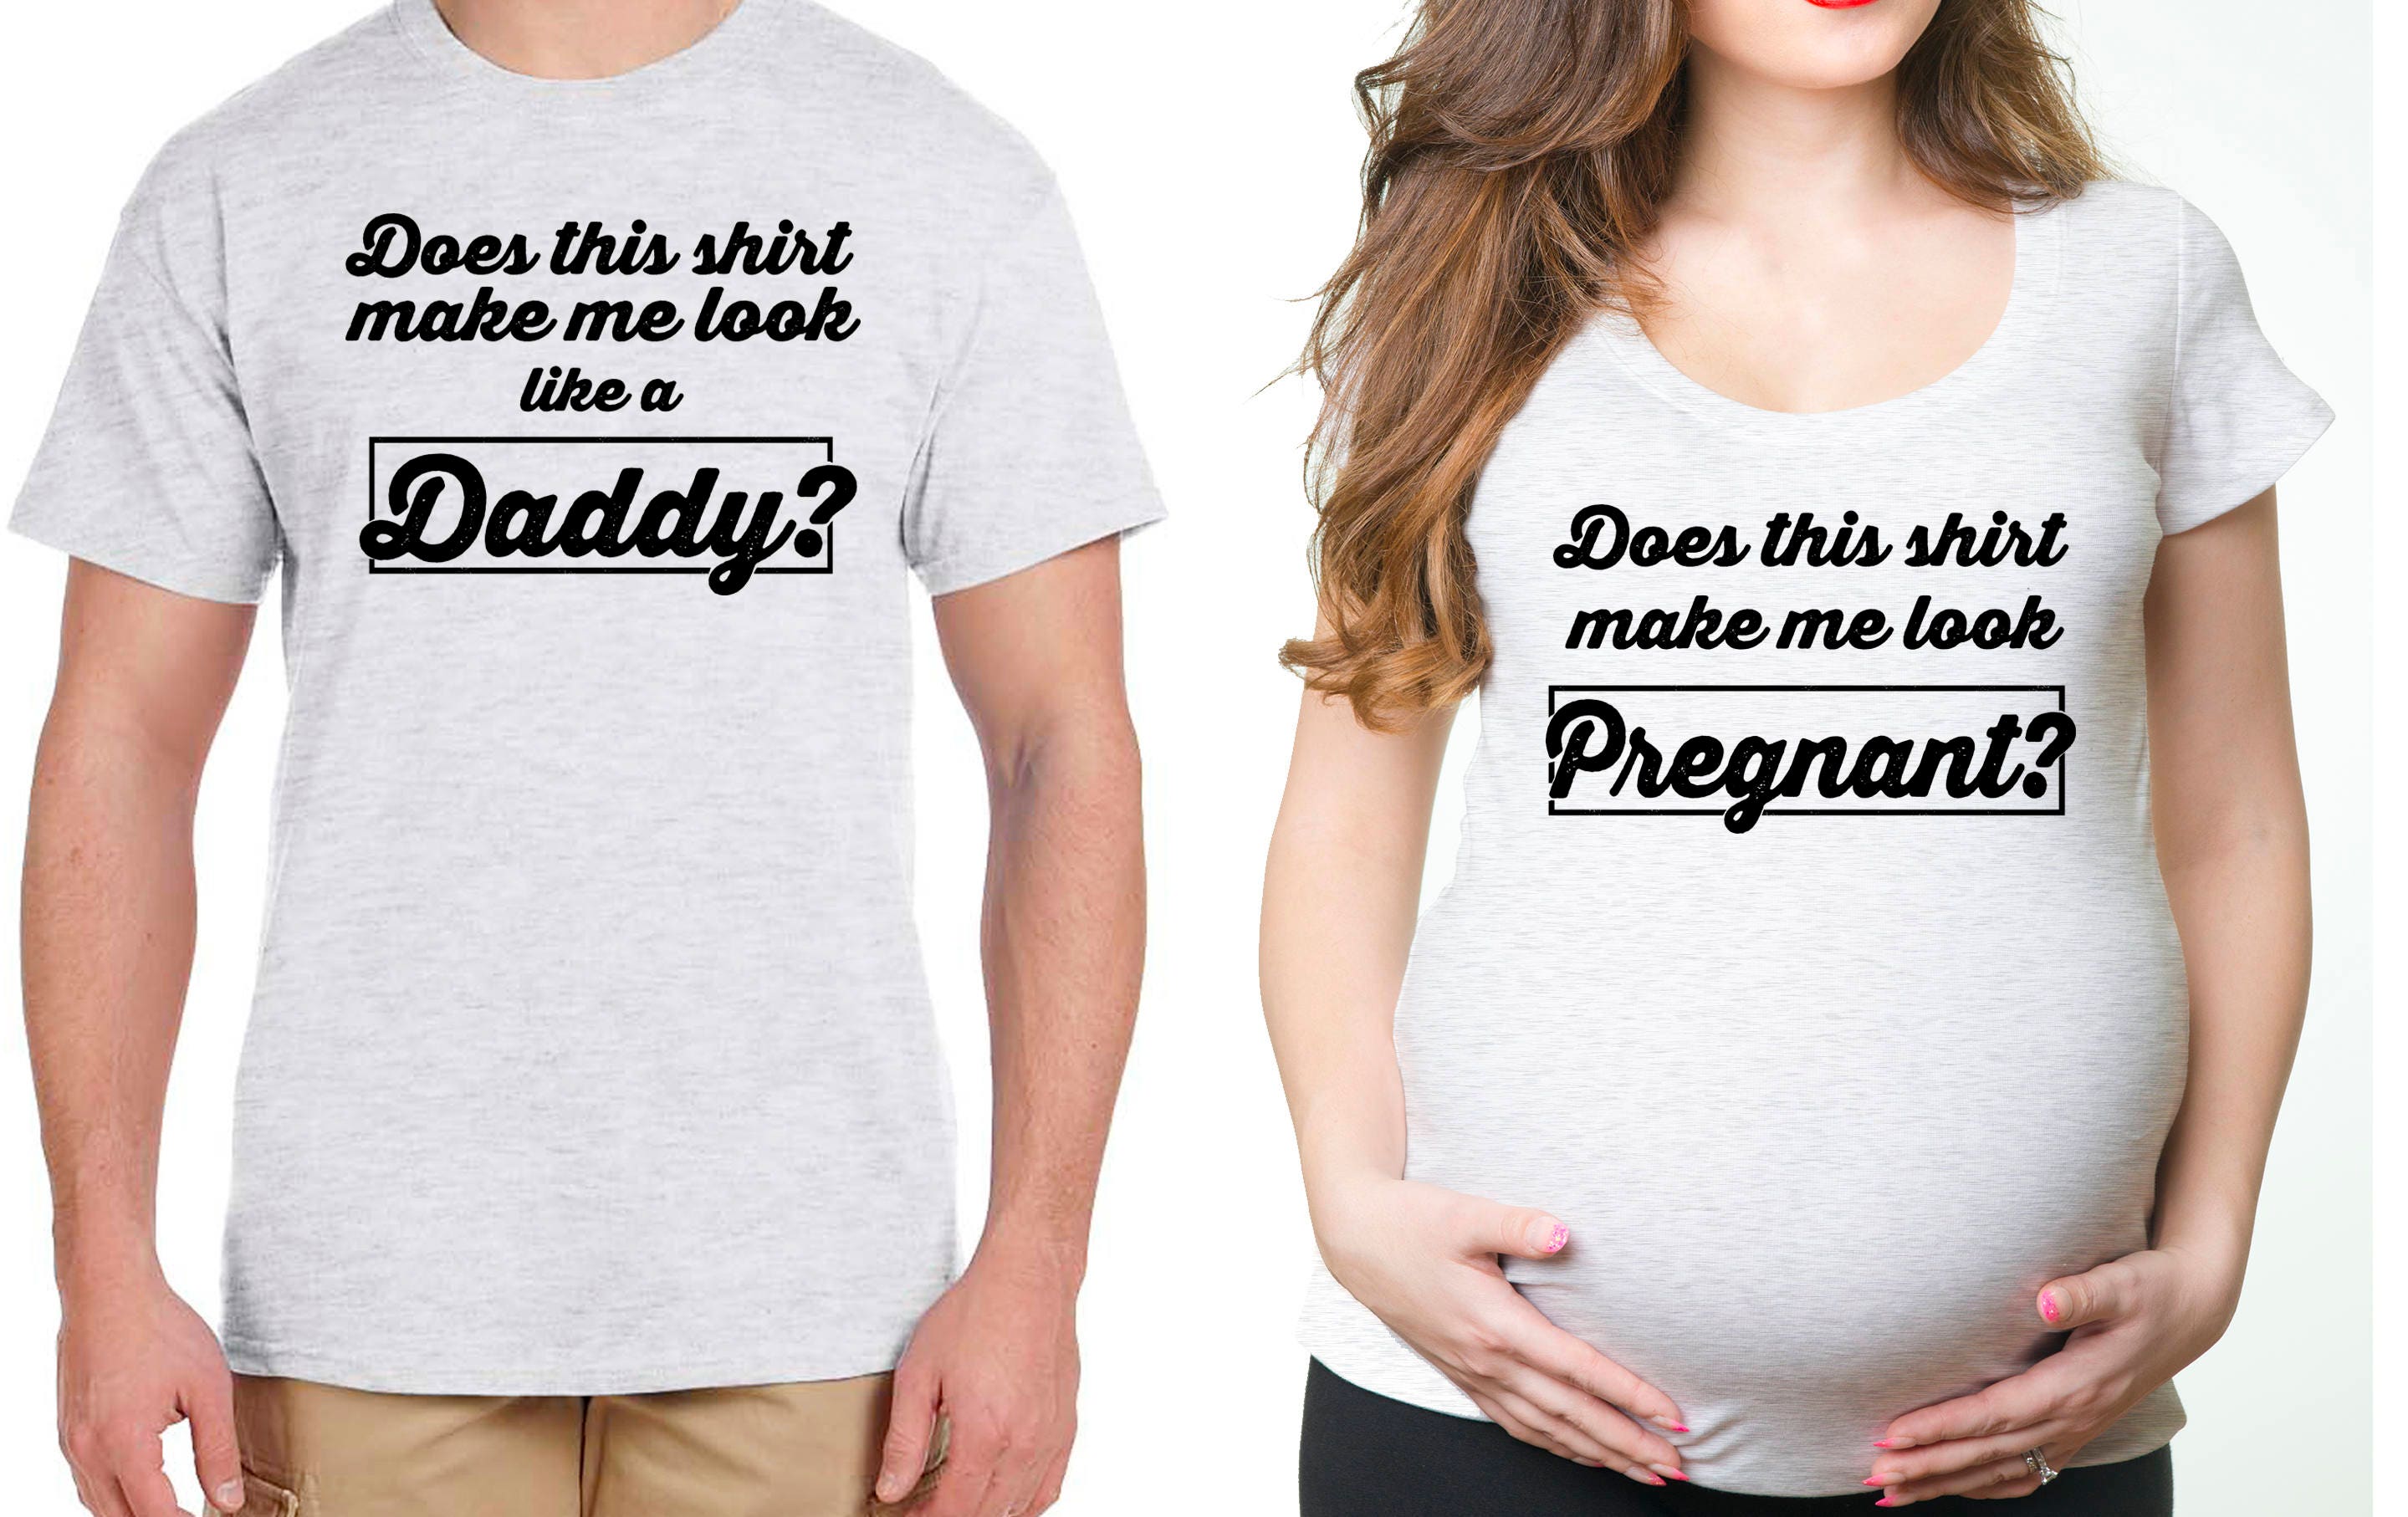 We're Pregnant T-shirt Couple Pregnancy Shirts Funny 